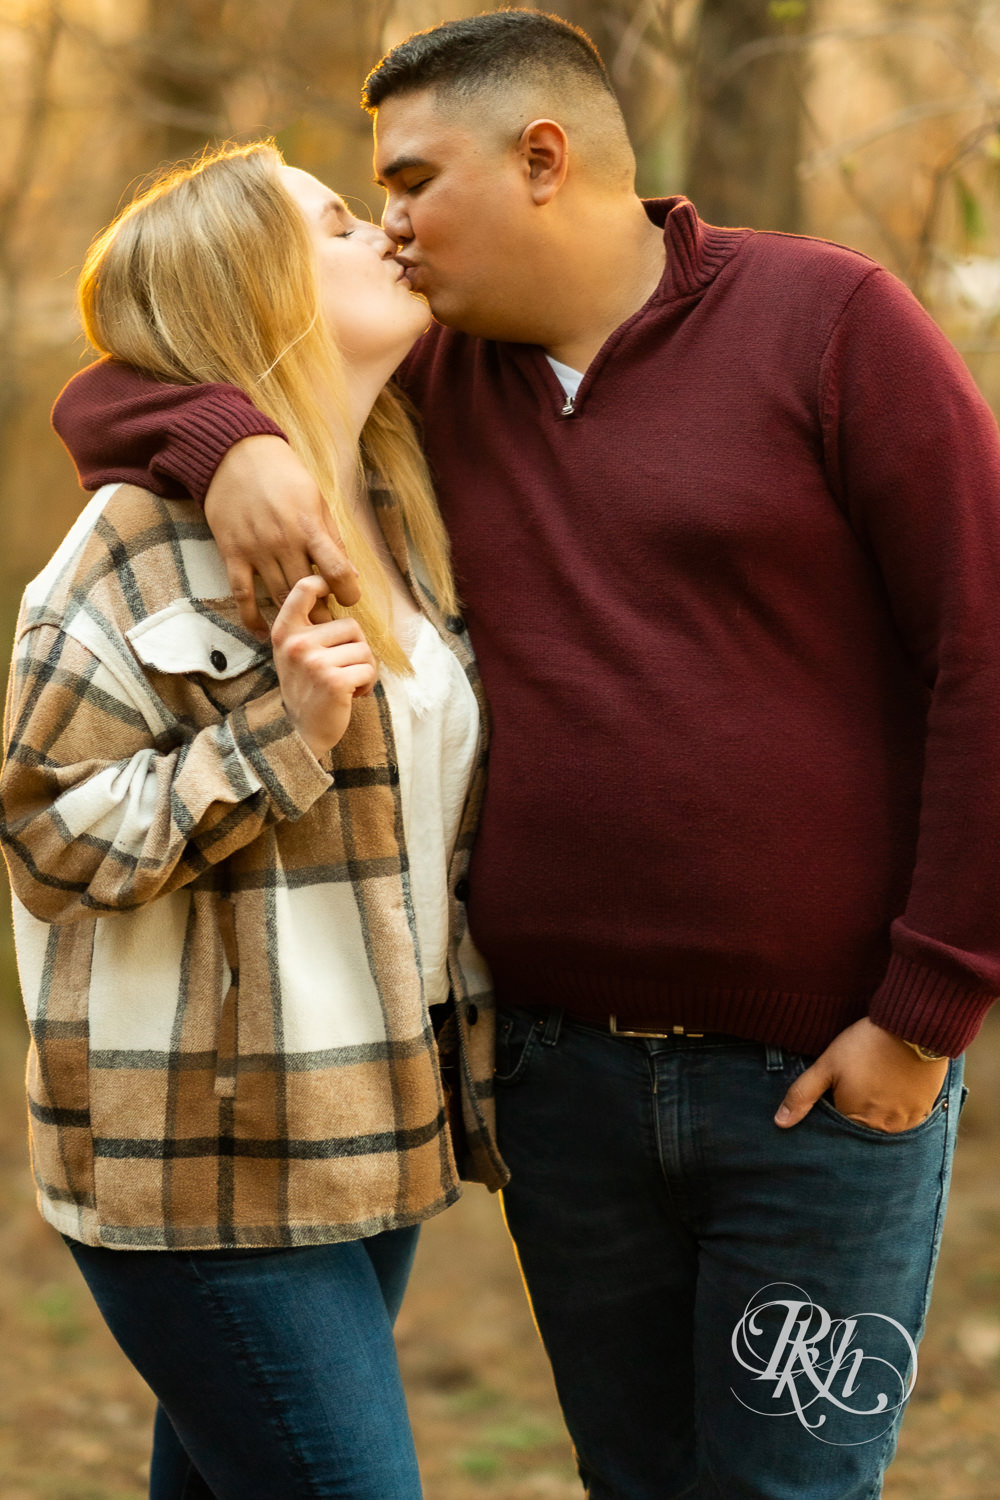 Filipino man and woman in flannel and jeans kiss during sunset at Lebanon Hills in Eagan, Minnesota.